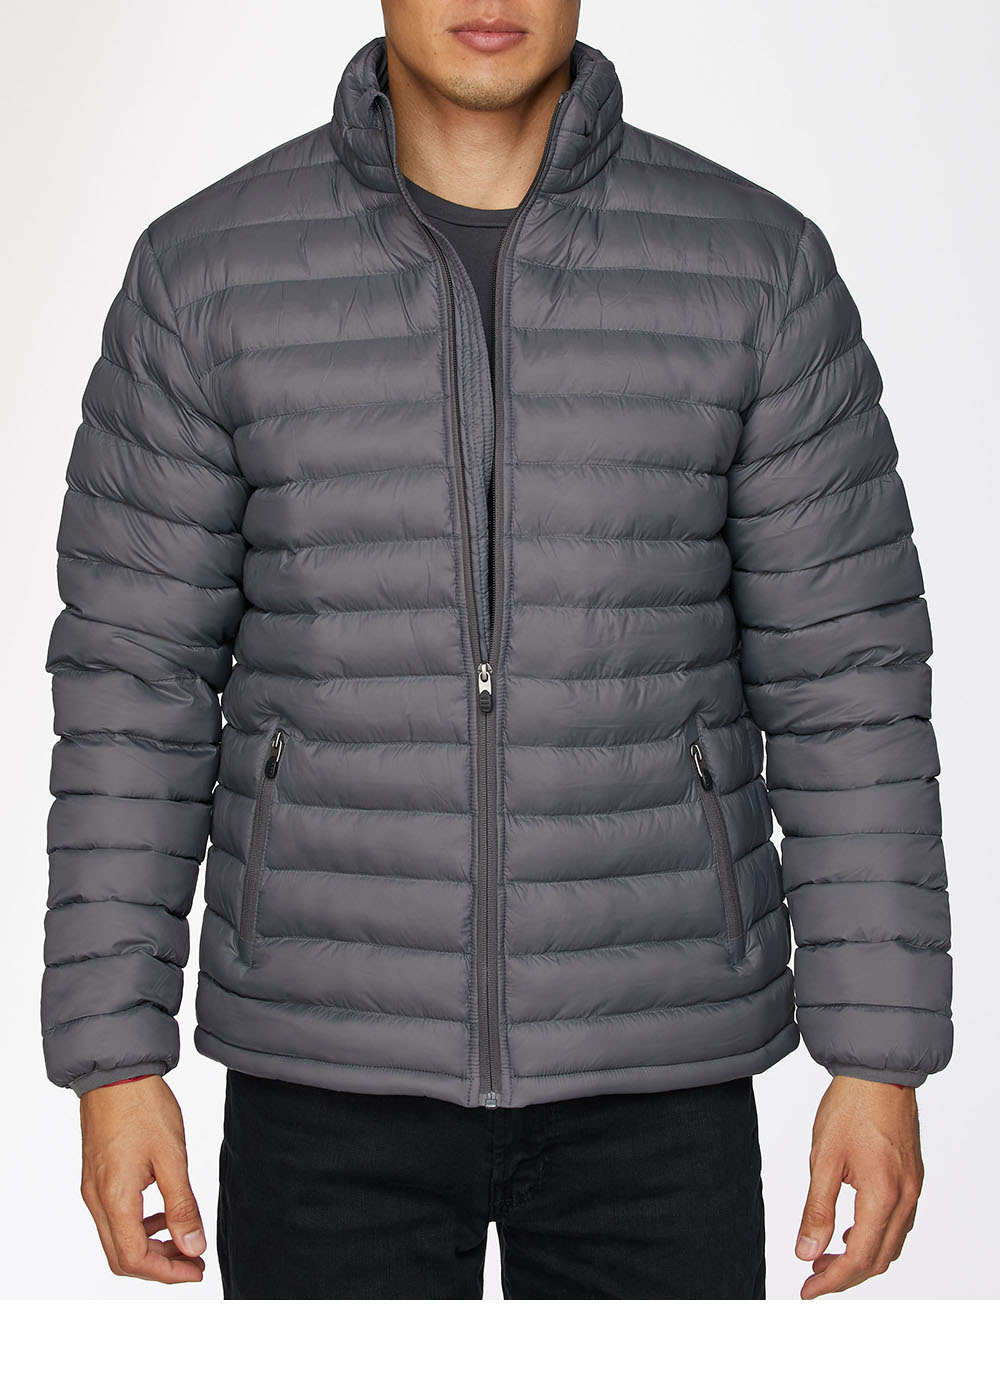  Men's High-Quality Nylon Quilted Jacket With Contrast Lining-Charcoal